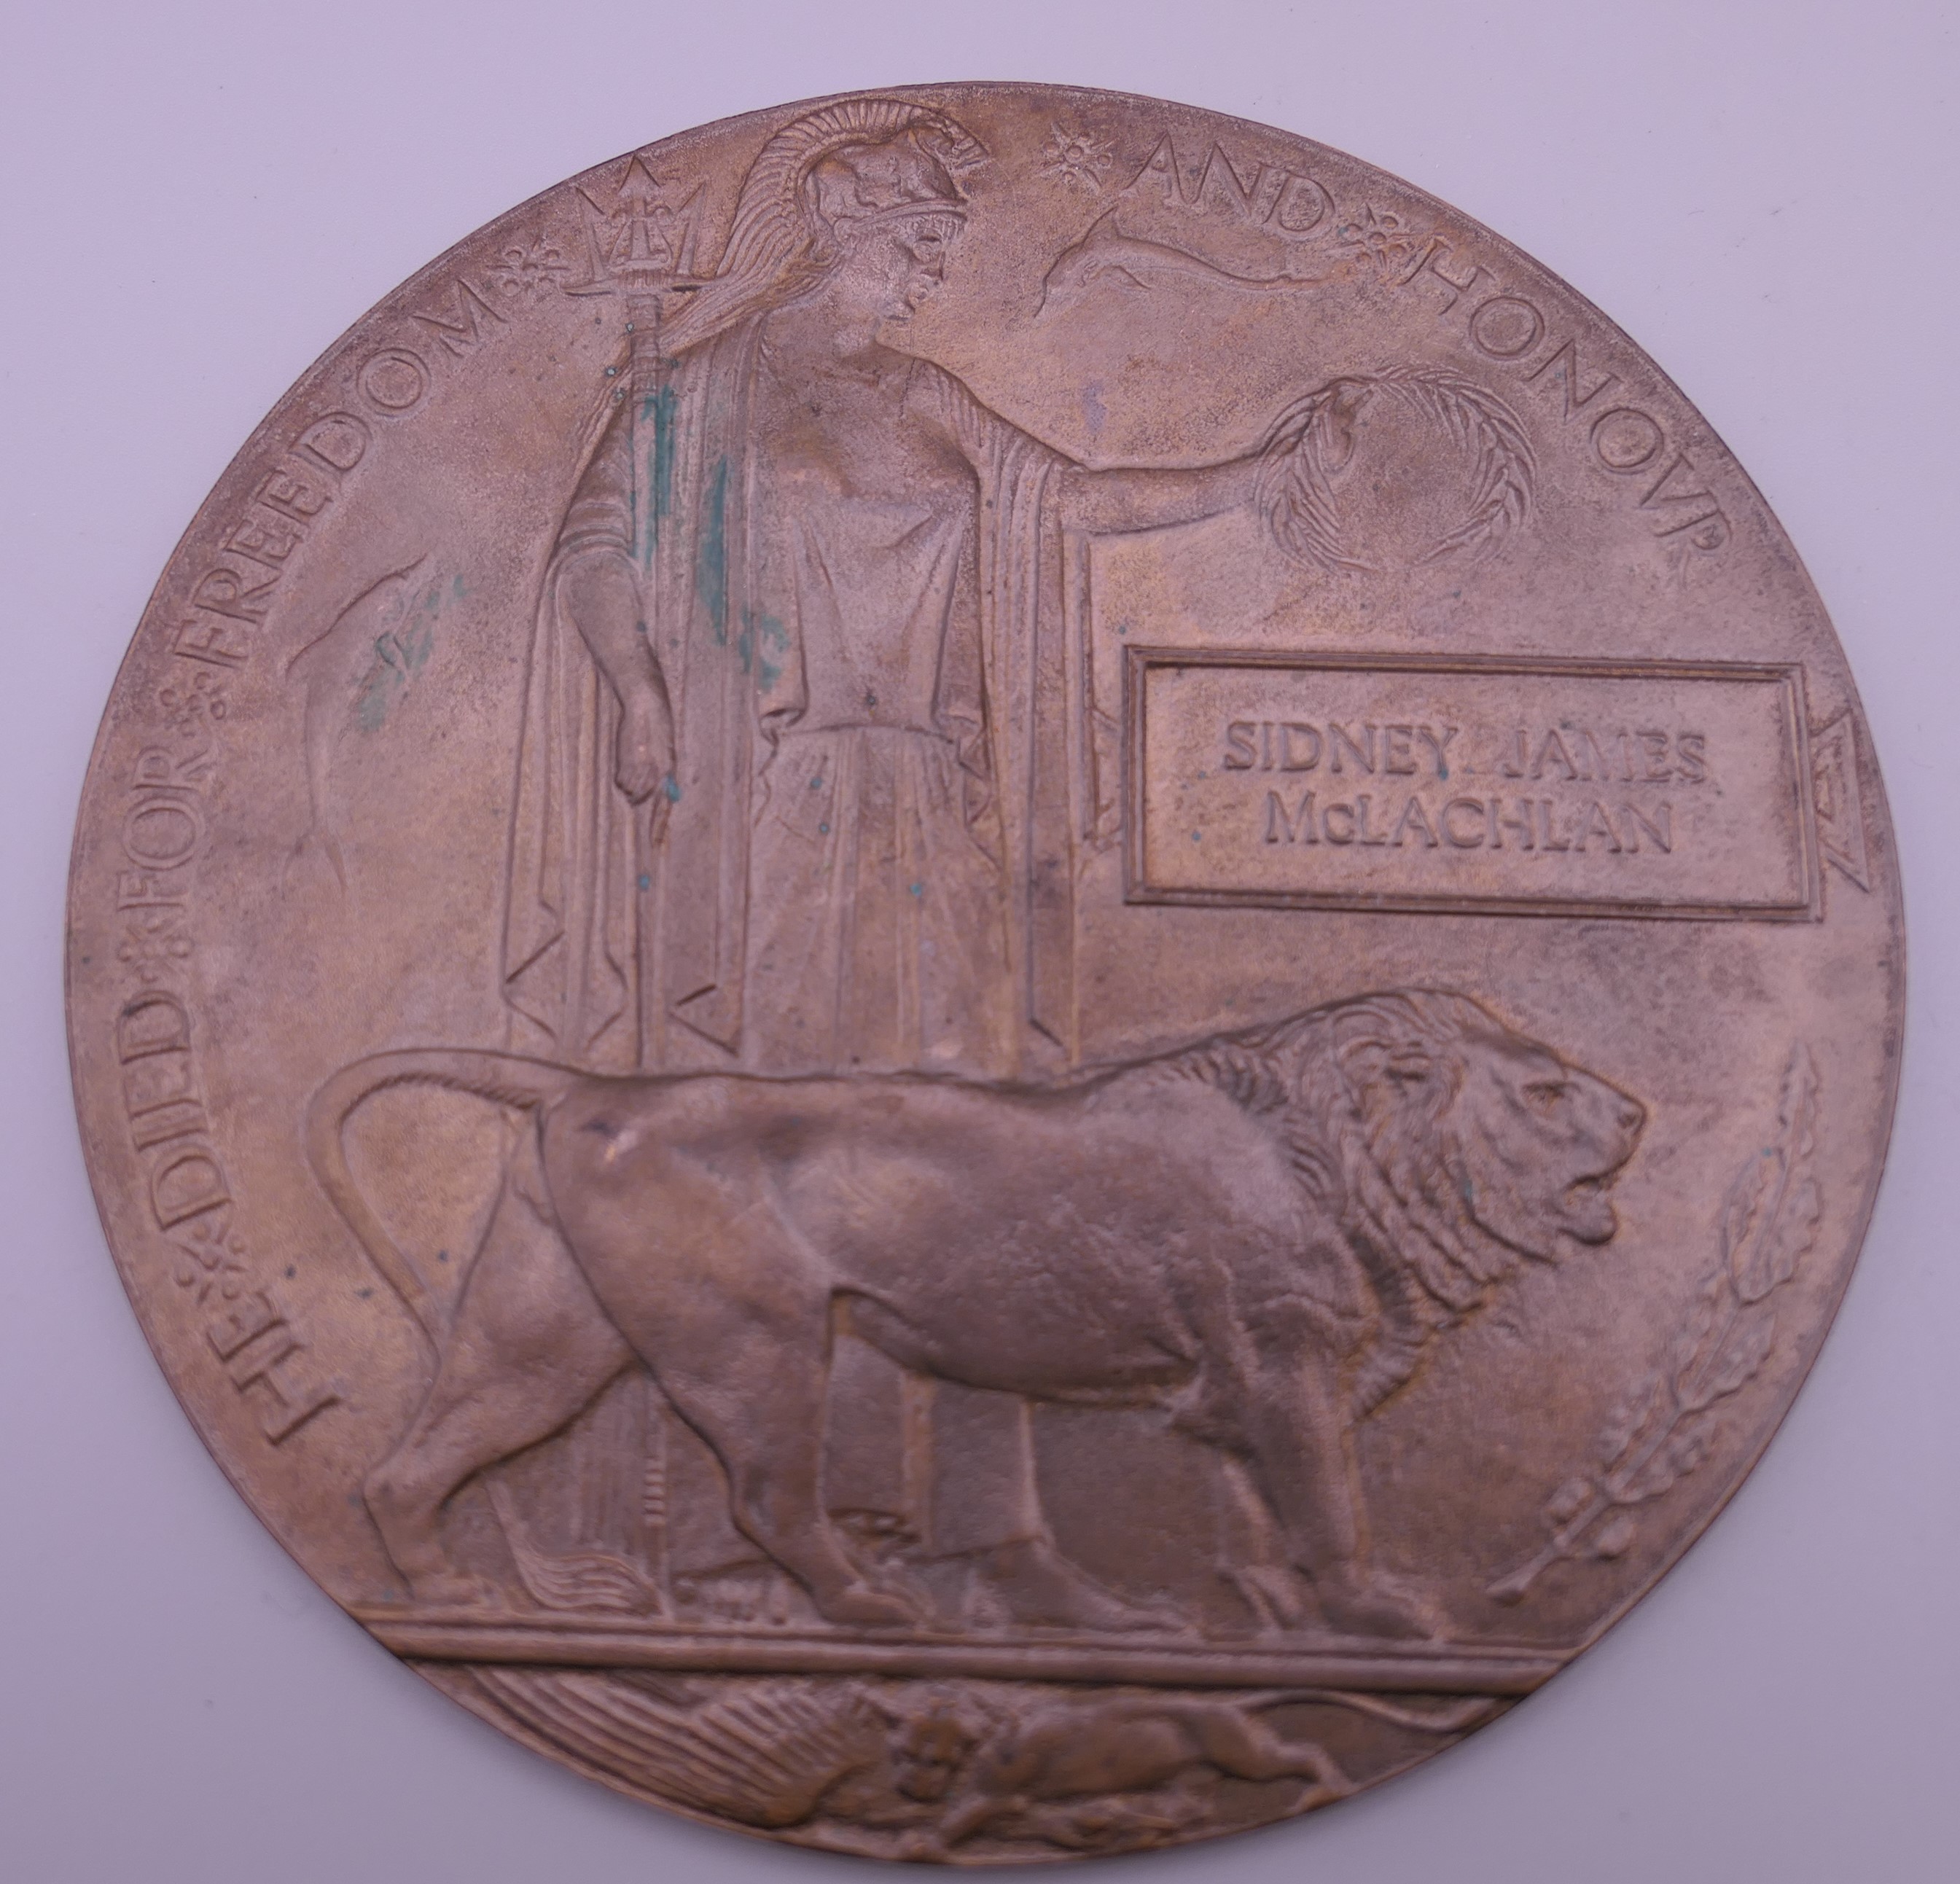 A Canadian WWI memorial death plaque for Sidney James McLachlan. 12 cm diameter. - Image 2 of 6